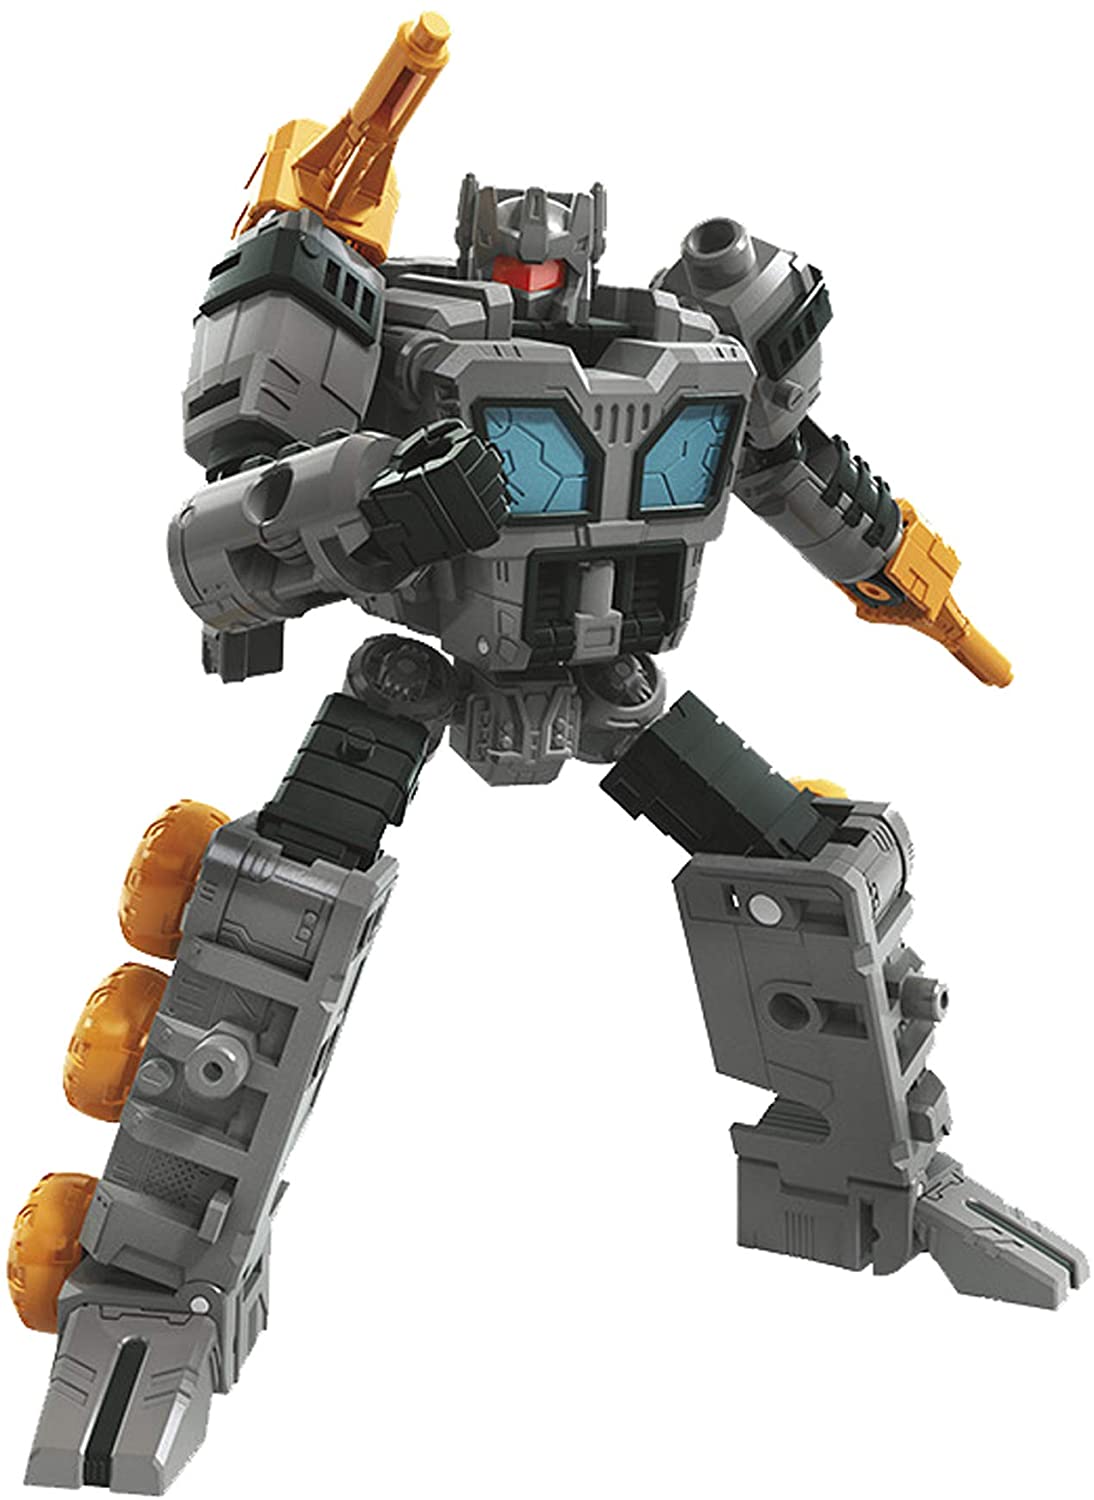 Transformers Toy Generations War For Cybertron: Earthrise Deluxe Wfc-E35 De